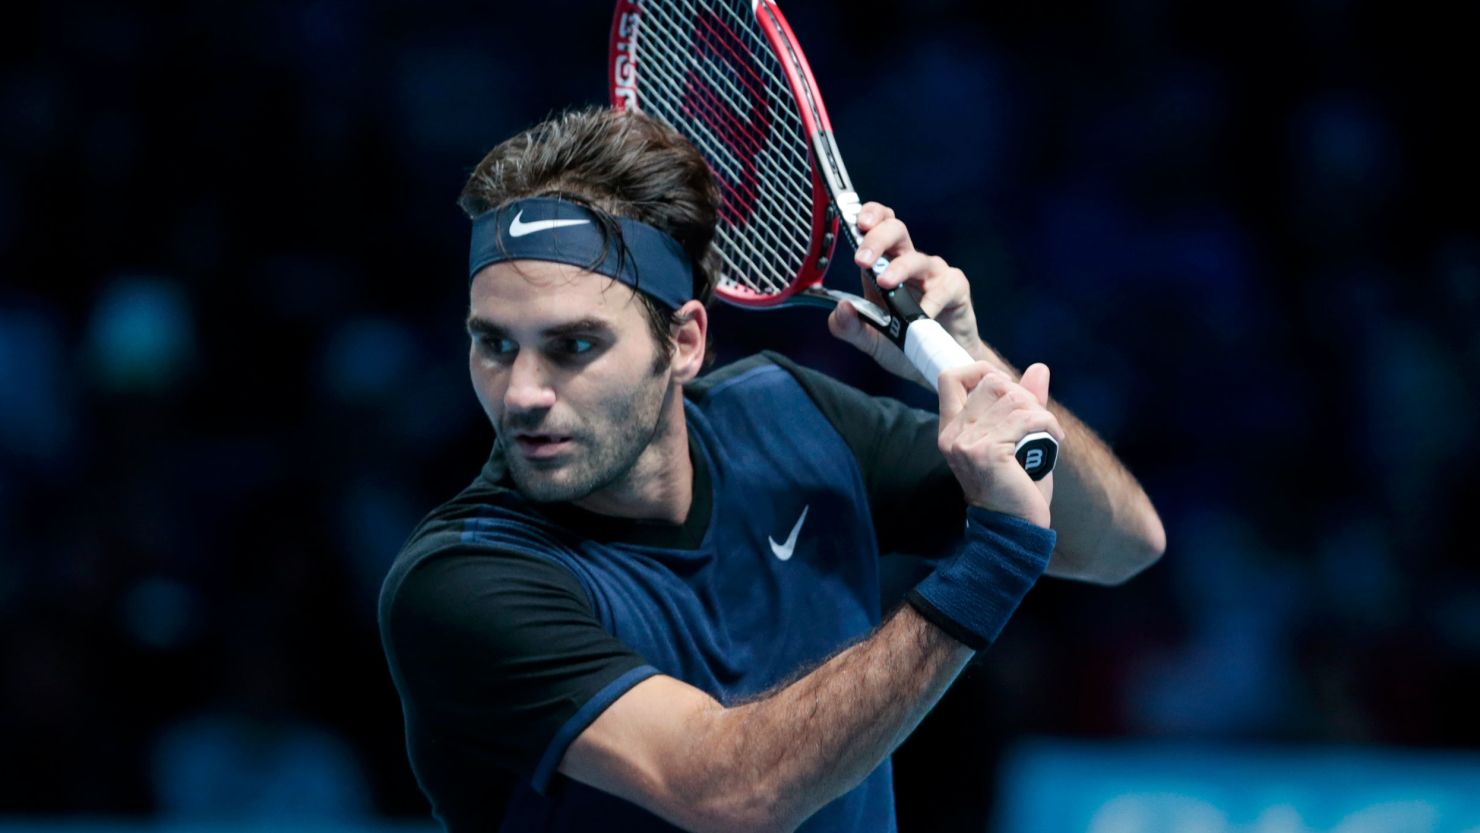 Letting Roger Federer leave Nike for Uniqlo was an 'atrocity,' says former  Nike tennis director